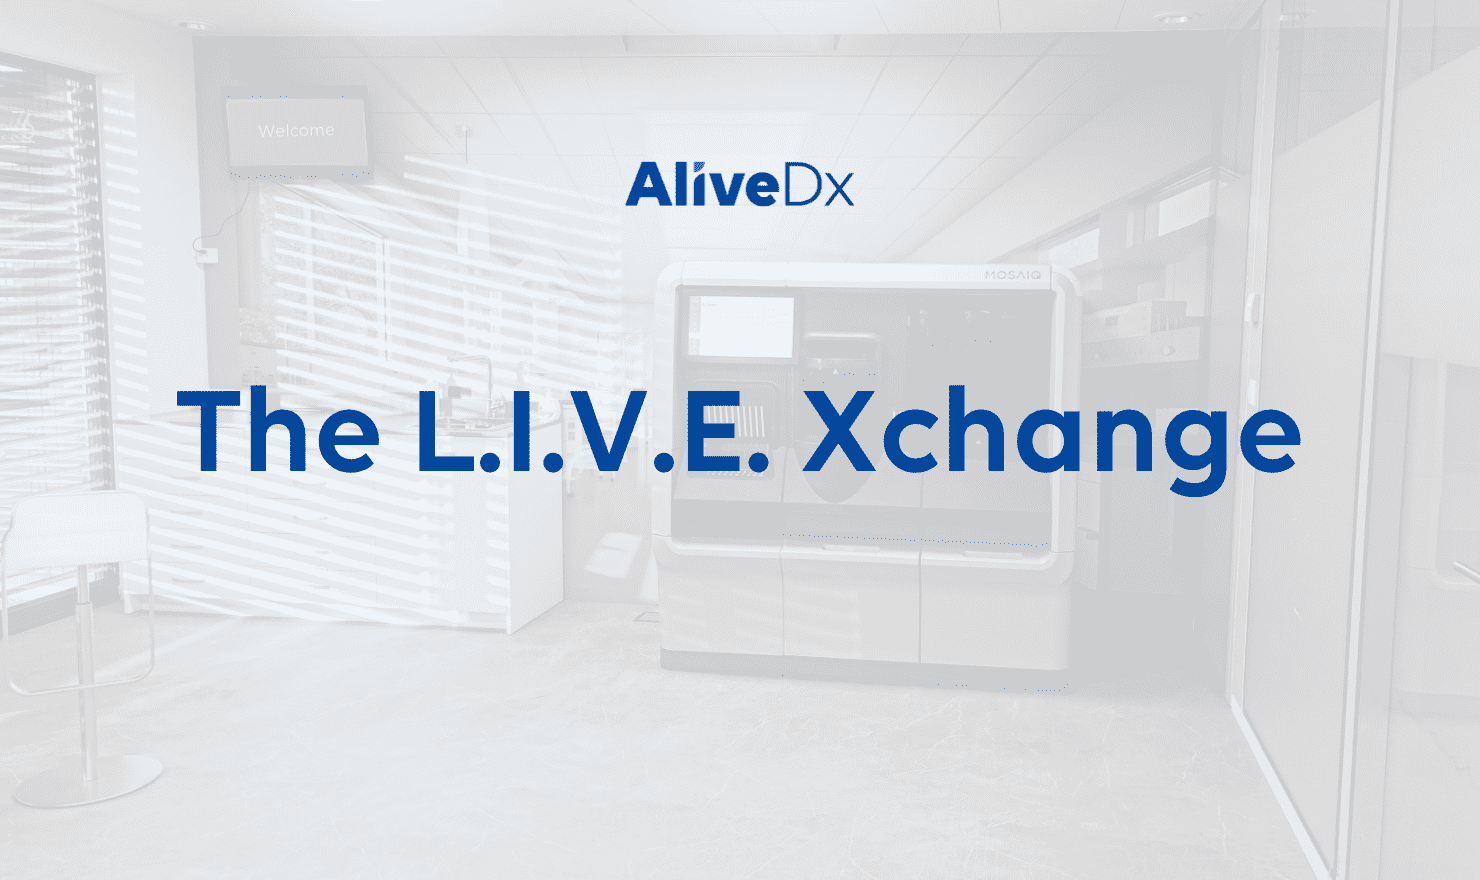 Unveiling The L.I.V.E Xchange showroom and innovation space